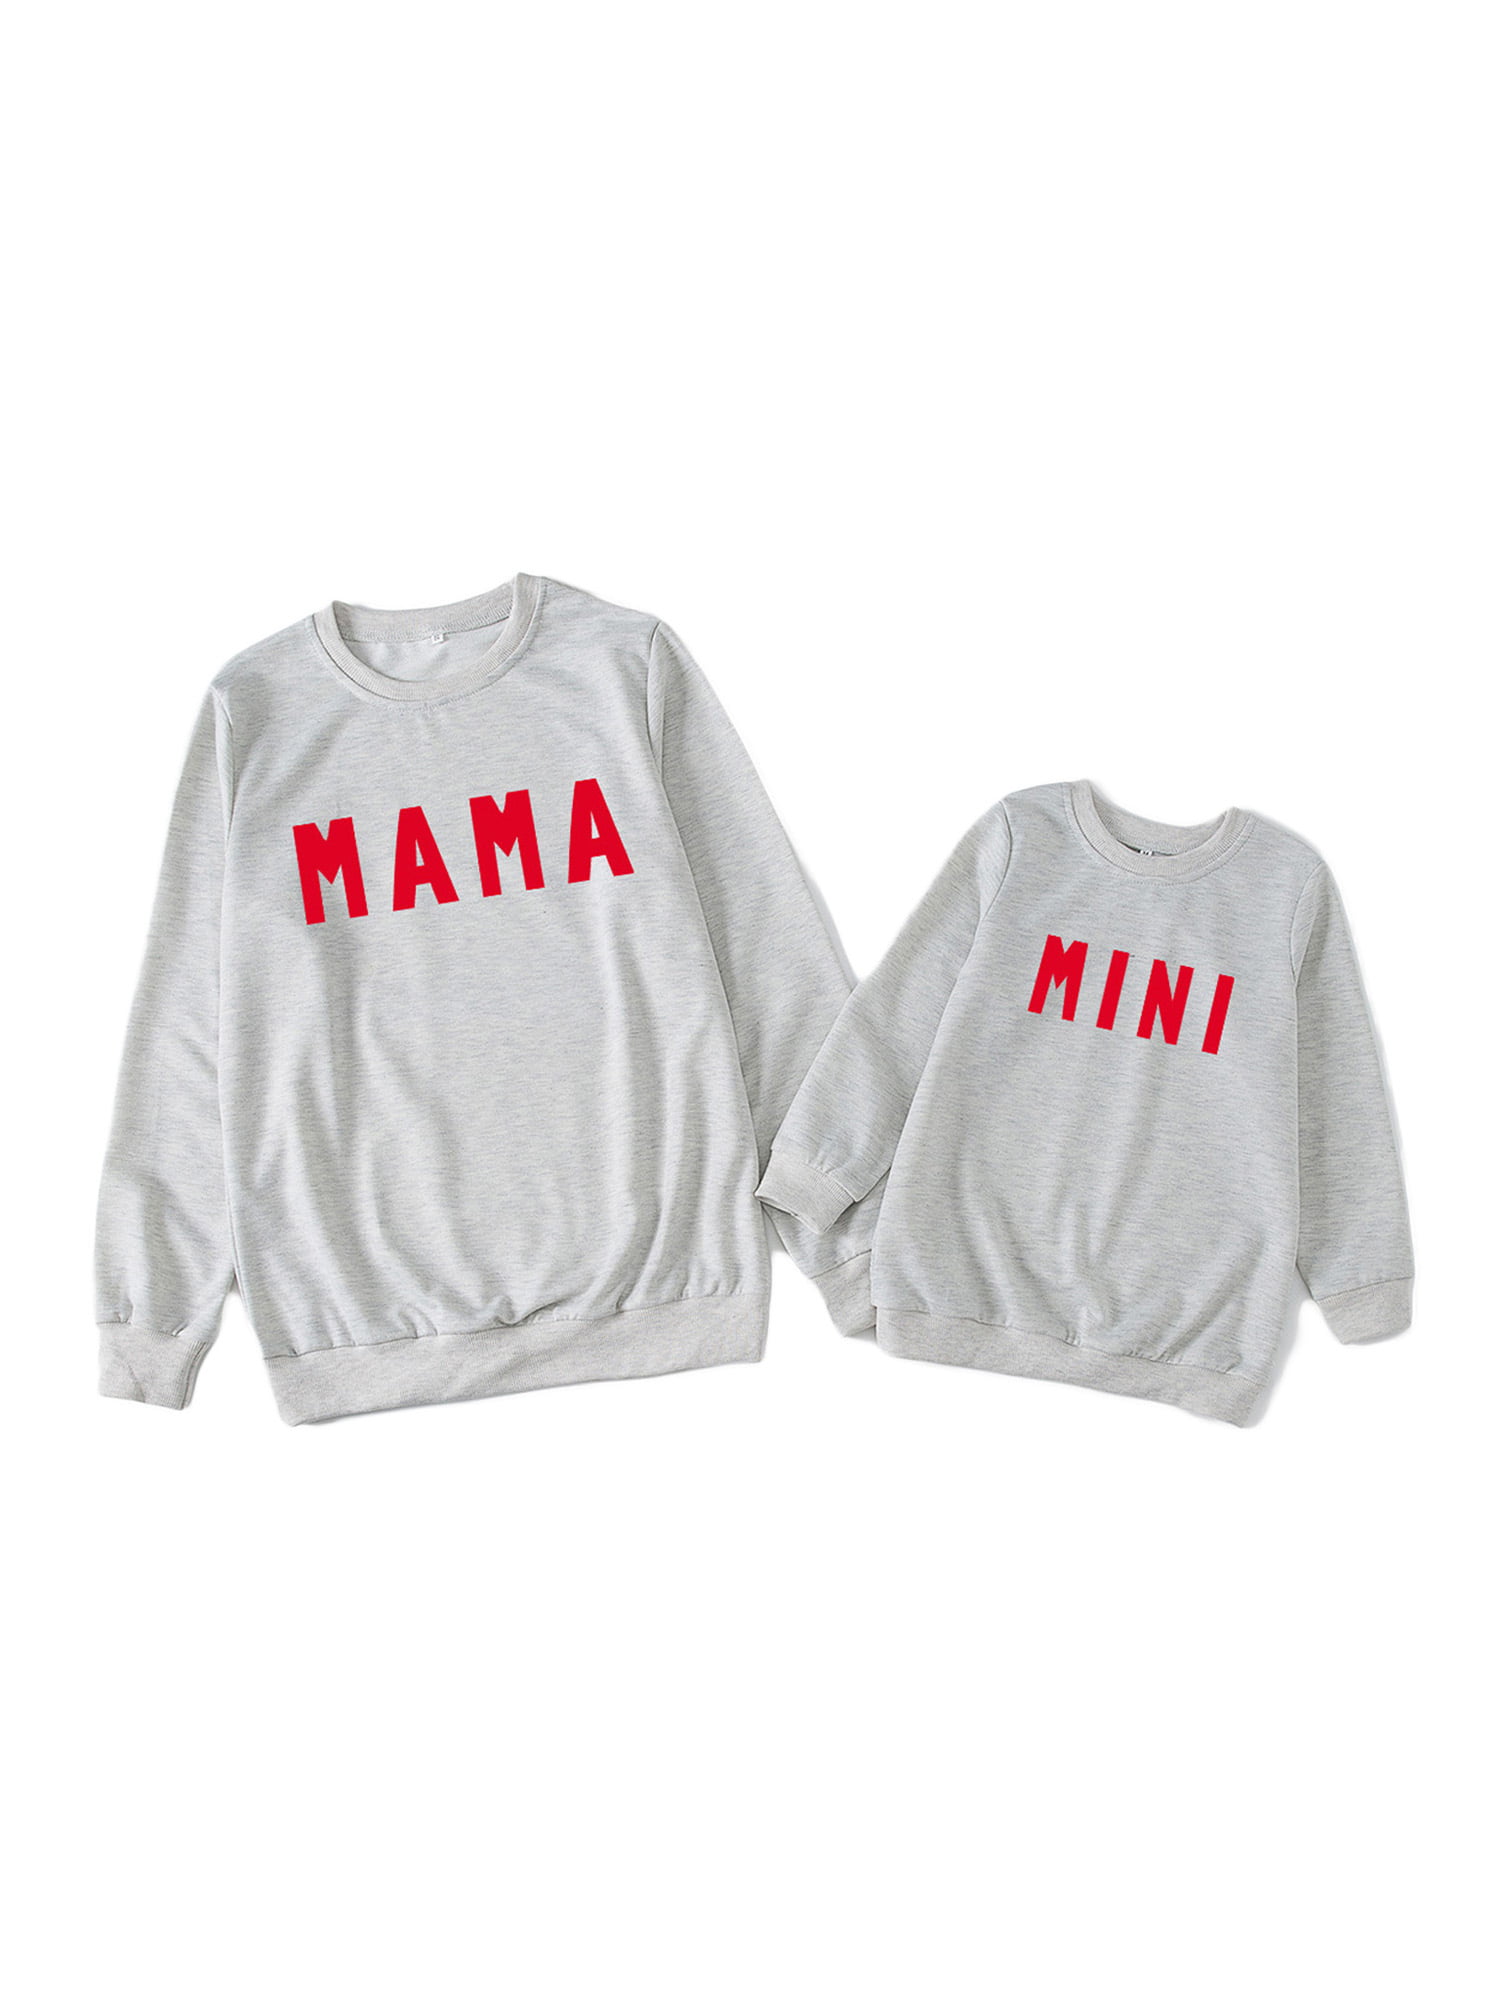 Mommy and Me Family Matching Outfits Casual Sweatshirts Long Sleeve Letters Pull Over Tee Tops Shirts Autumn Clothes